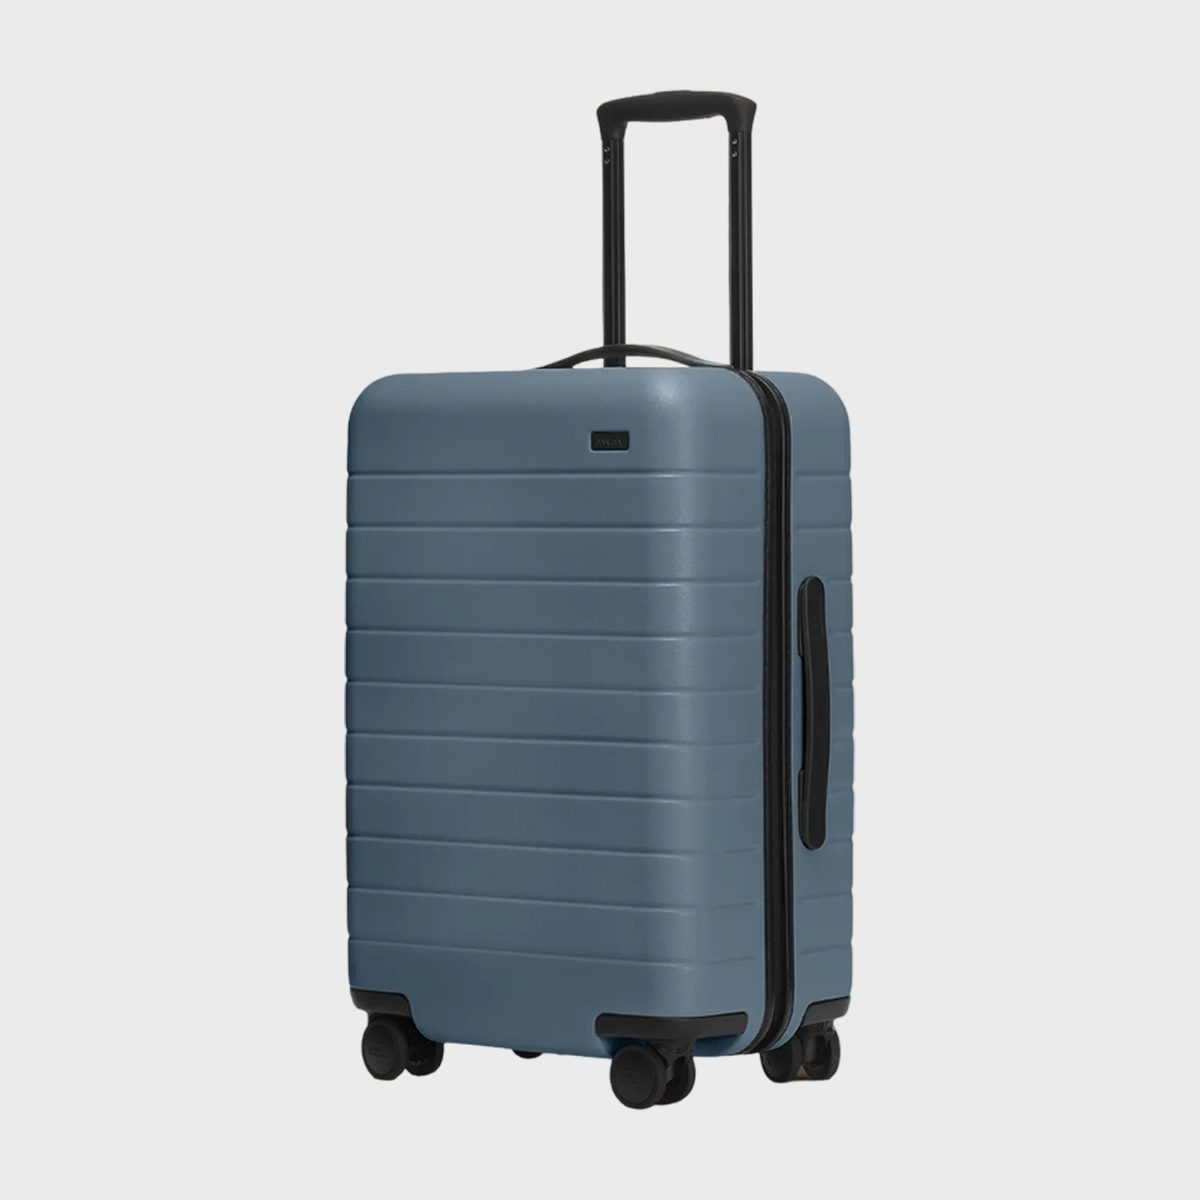 <h3>Away The Bigger Carry-On</h3> <p>Designed to <a href="https://www.rd.com/list/what-to-pack-in-carry-on/">maximize space</a>, this <a href="https://www.awaytravel.com/suitcases/bigger-carry-on" rel="noopener">Away suitcase</a> is an excellent choice for longer trips. Its durable polycarbonate shell ensures the utmost protection for your belongings, while the interior compression system, multiple compartments and built-in laundry bag help you stay organized. With the added convenience of a TSA-approved lock, your items remain secure throughout your journey. Furthermore, this suitcase offers a range of beautiful color options, from charming baby blue to neon green and timeless basic black, allowing for a touch of personal style.</p> <p>Verified buyer Beth P. writes, "The bigger carry-on was perfect for this overseas journey to Tuscany, including Rome and Florence. The bigger carry-on held five dresses, a ball skirt, six pairs of shoes, spare jeans, multiple tees, pool and loungewear plus all the foundational garments I needed!"</p> <p><strong>Pros</strong></p> <ul> <li>Spacious size is ideal for longer trips, but still fits in overhead bins</li> <li>Built-in lock and laundry bag are added bonuses</li> <li>Beautiful color options</li> <li>Lifetime warranty</li> <li>100-day trial</li> </ul> <p><strong>Cons</strong></p> <ul> <li>USB charger costs extra</li> </ul> <p class="listicle-page__cta-button-shop"><a class="shop-btn" href="https://www.awaytravel.com/suitcases/bigger-carry-on">Shop Now</a></p>